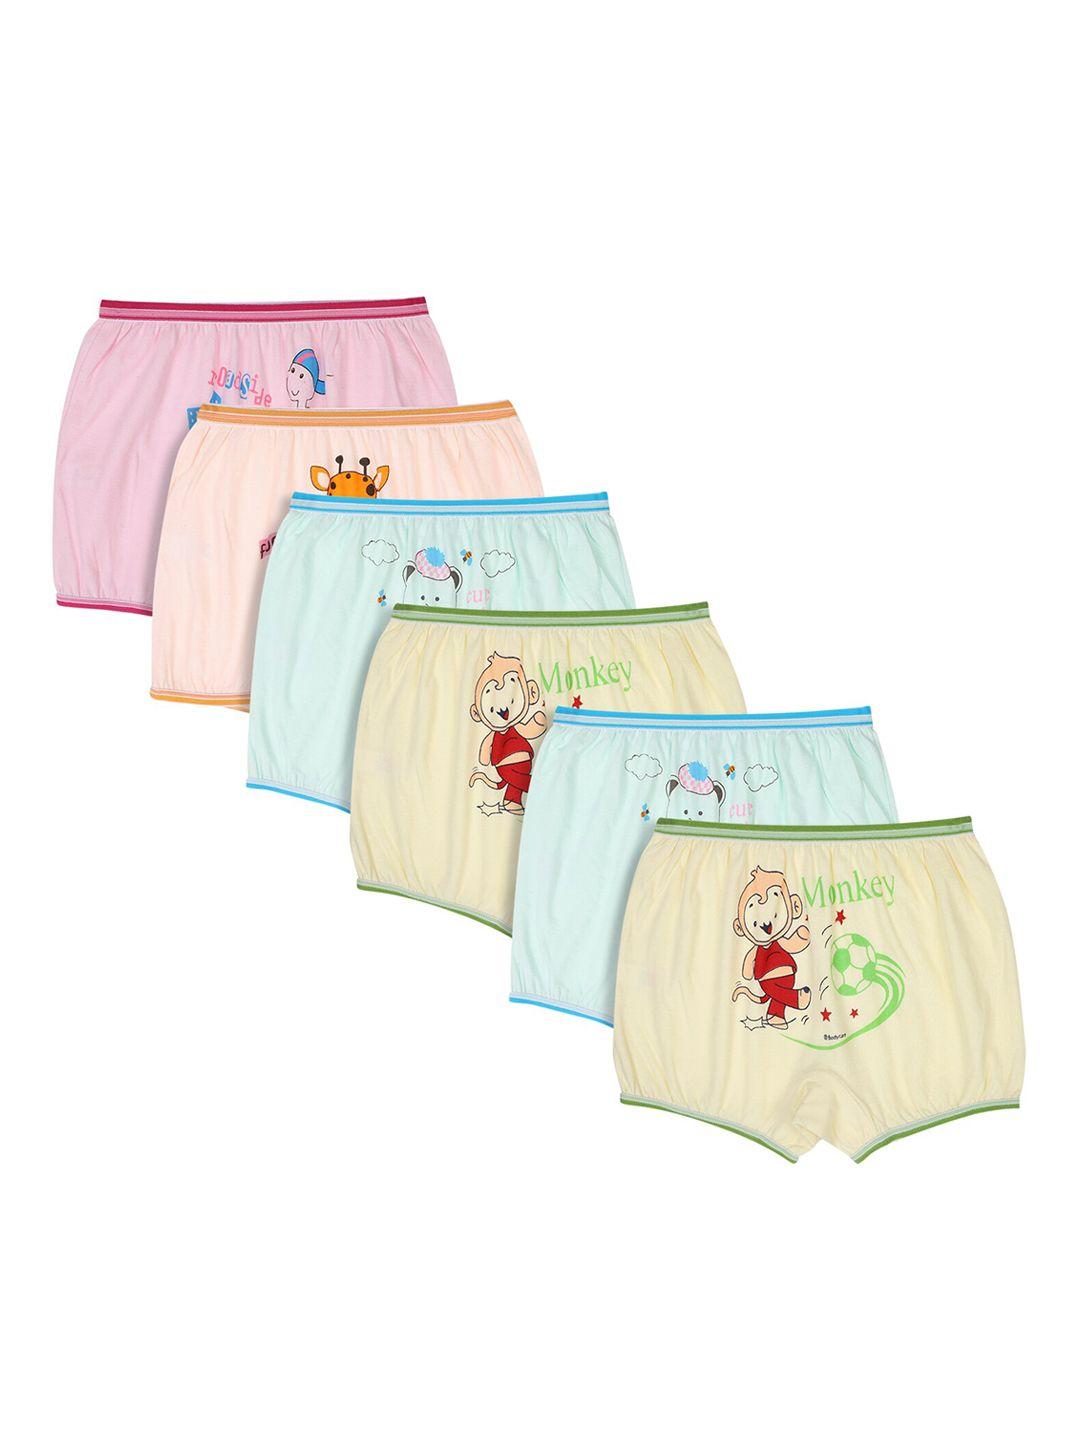 bodycare pack of 6 assorted kids infant cotton basic briefs